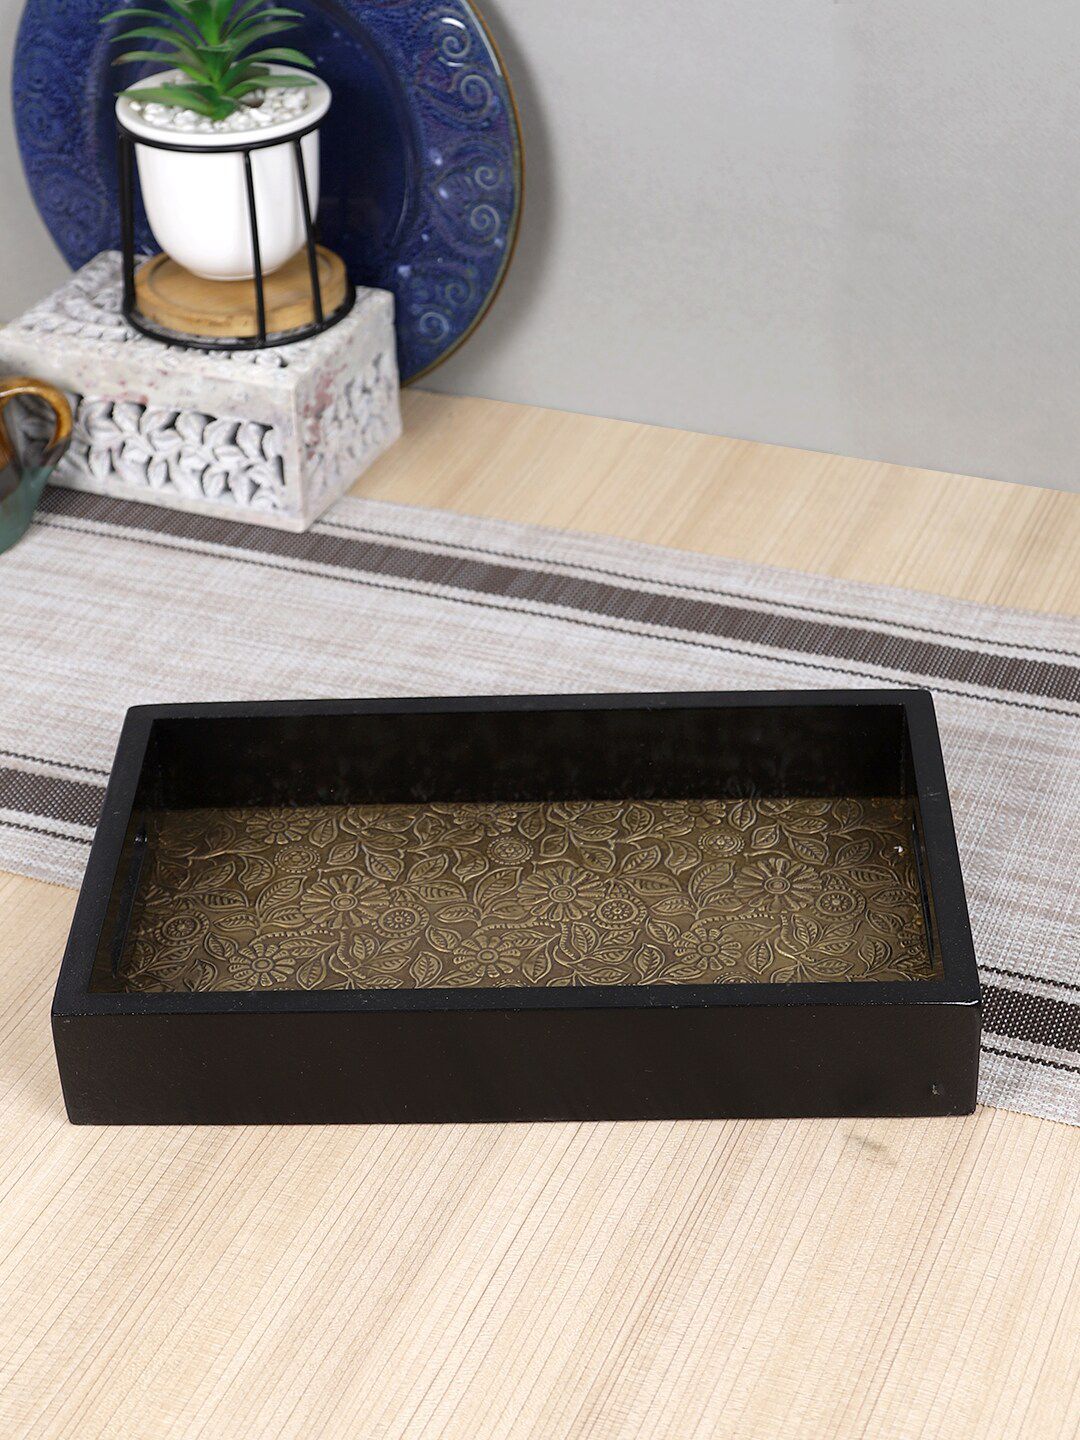 Aapno Rajasthan Black Solid MDF Tray Price in India